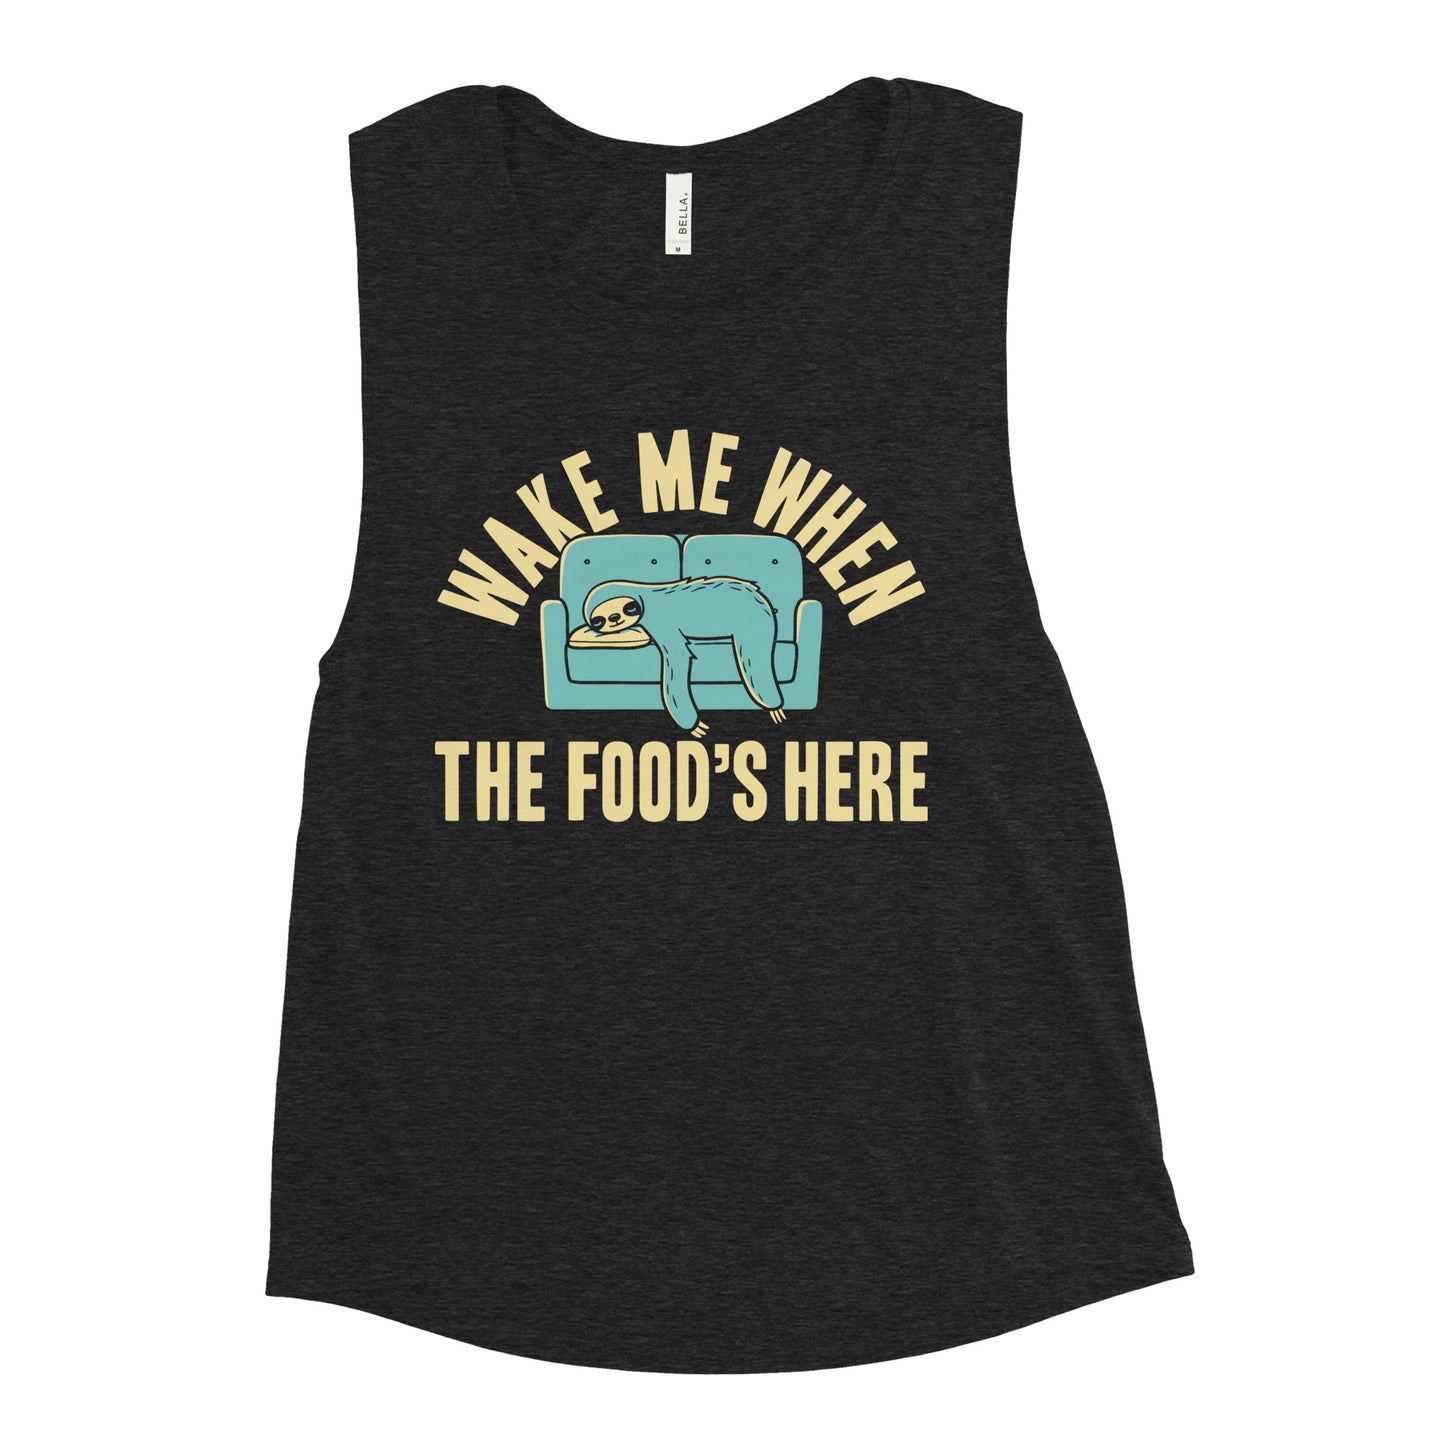 Wake Me When The Food's Here Women's Muscle Tank